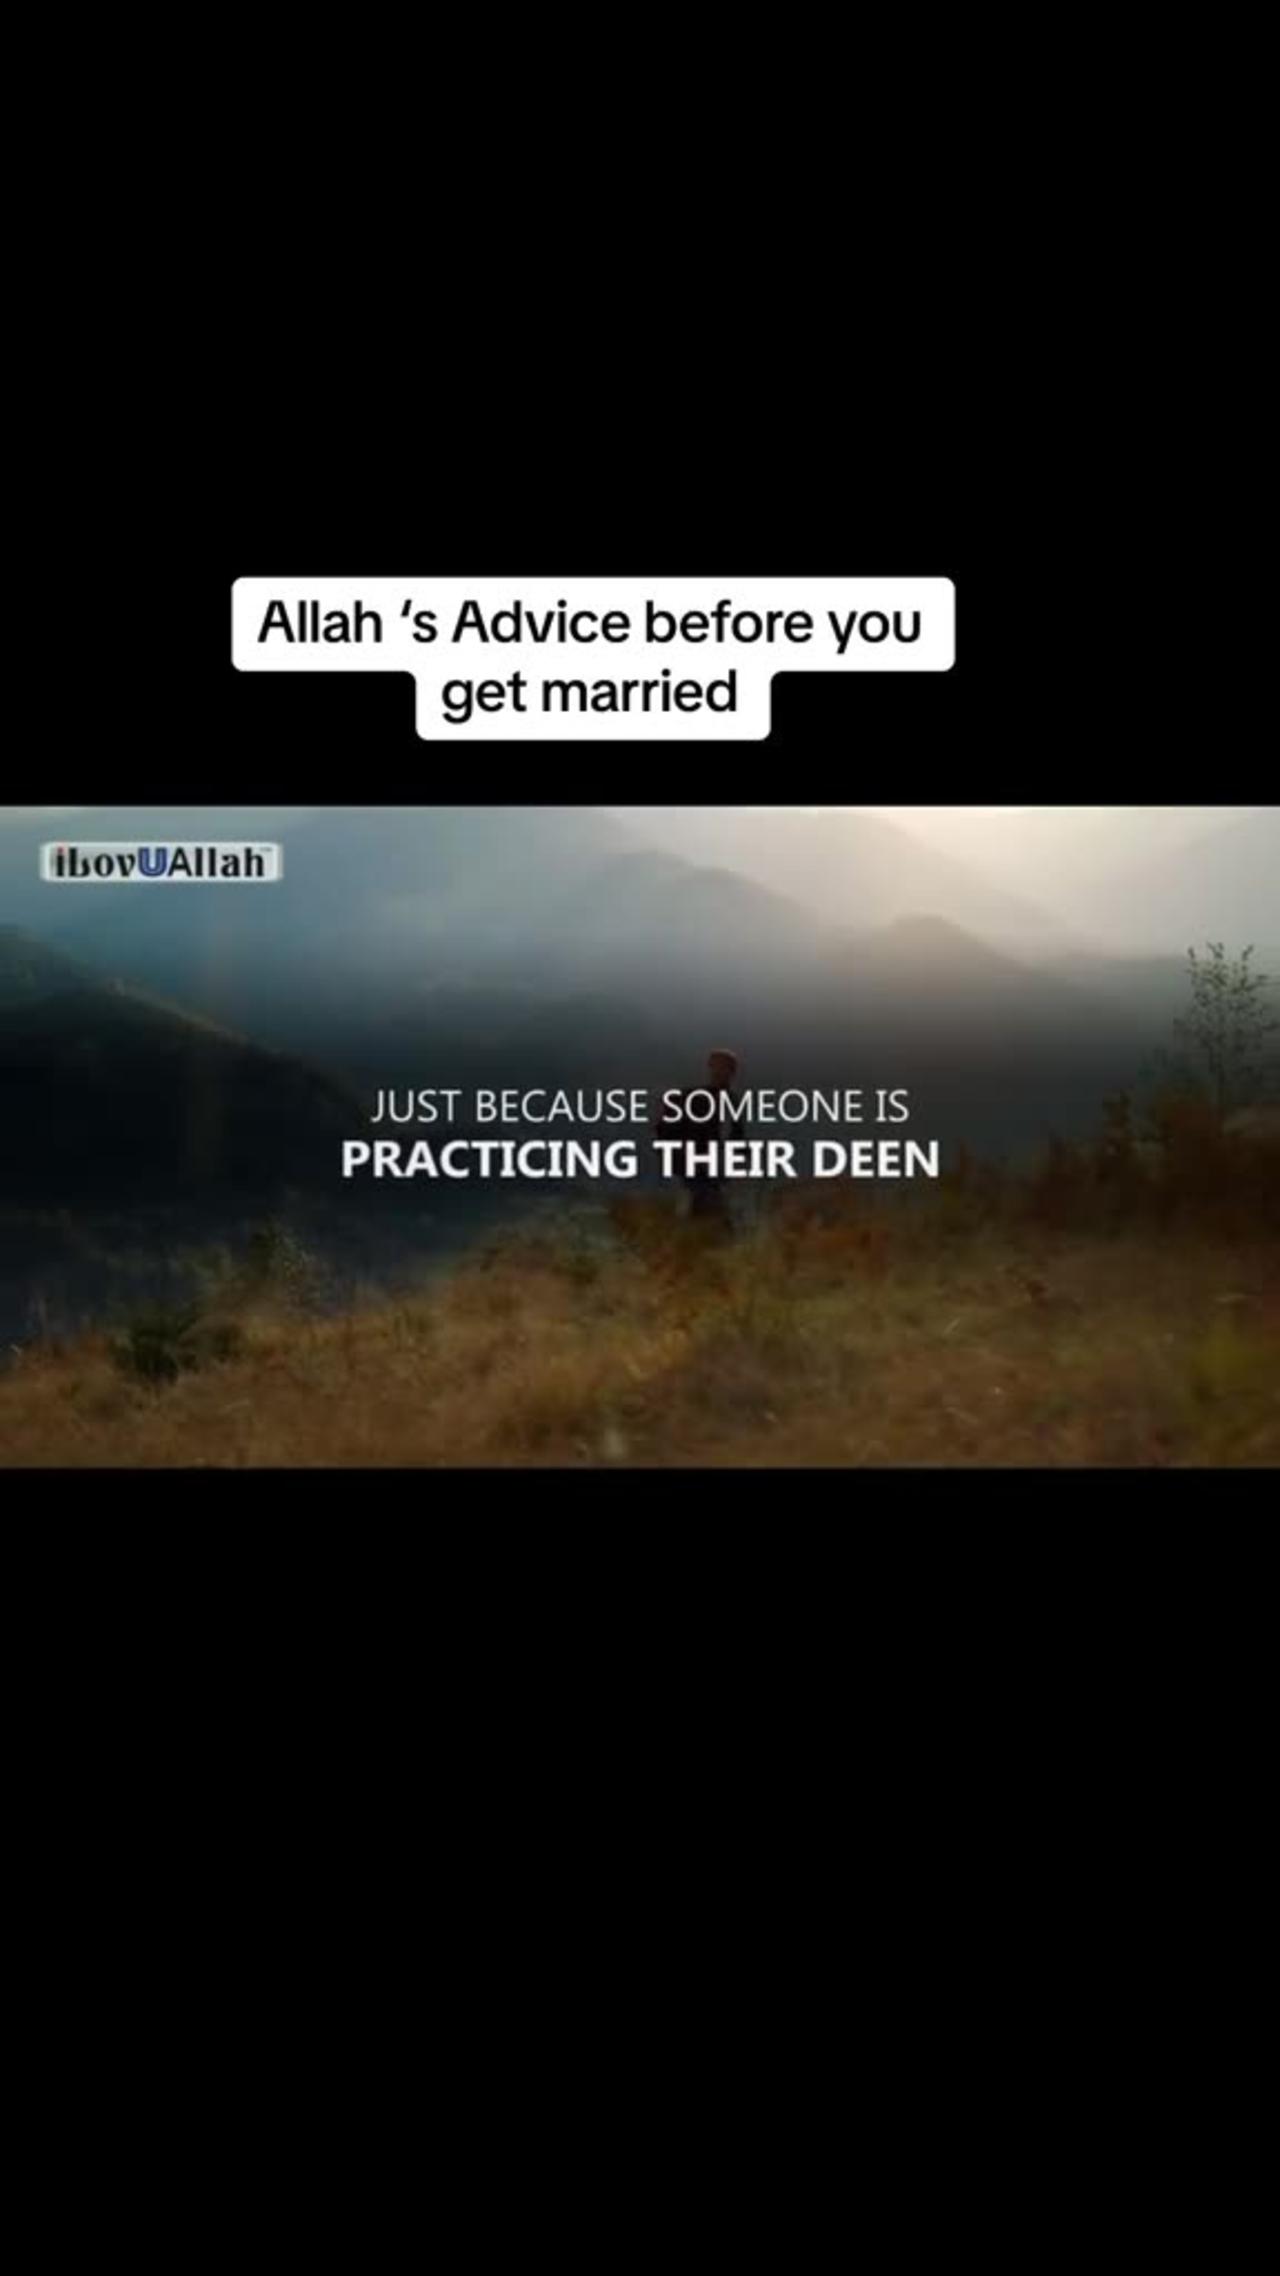 Allah's advice before you get married